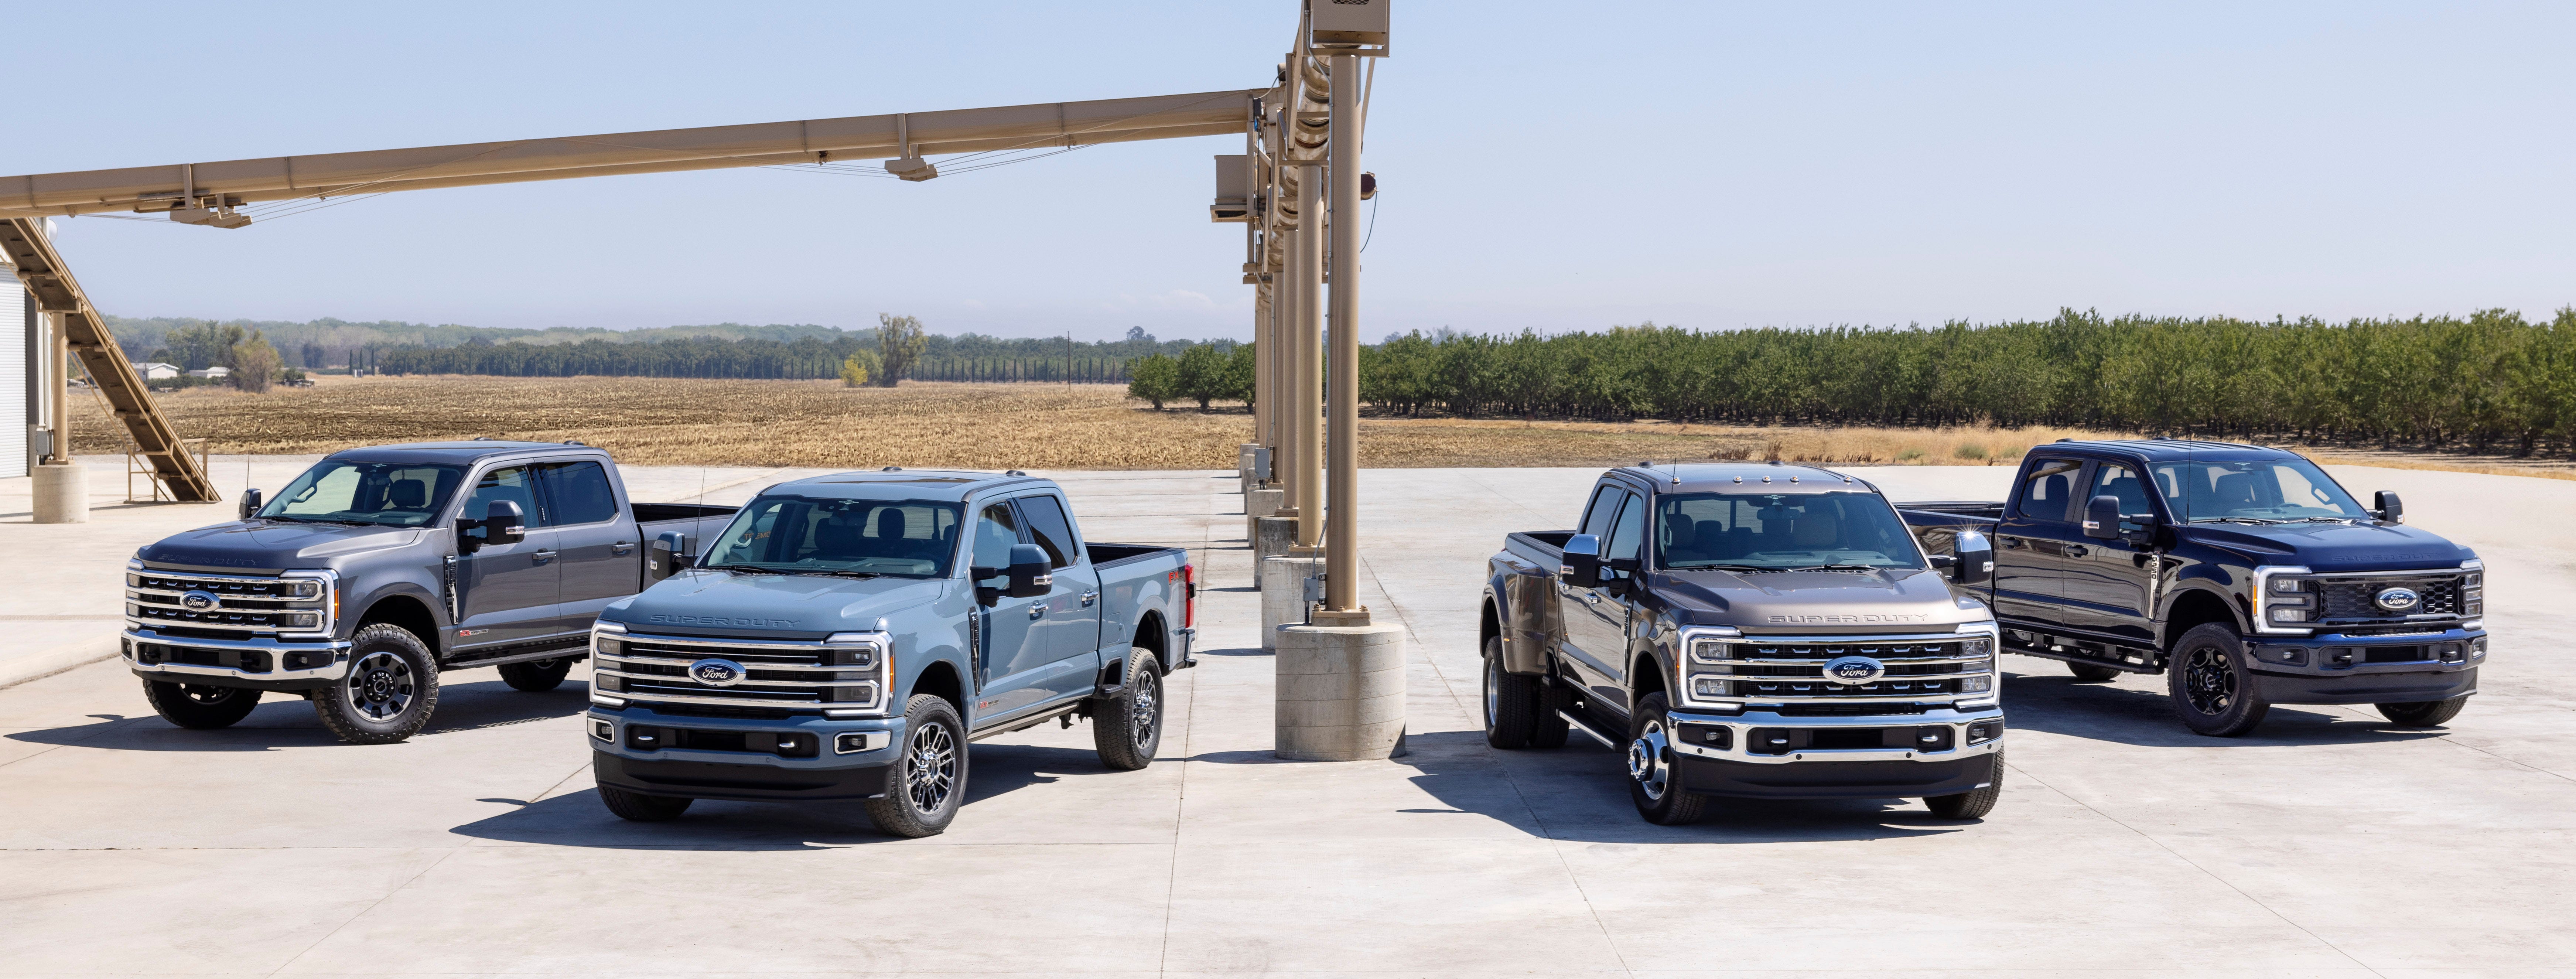 Ford Revamps F-Series Super Duty Pickup Trucks With New Design, 5G Connectivity: Here's When It Will Be Released